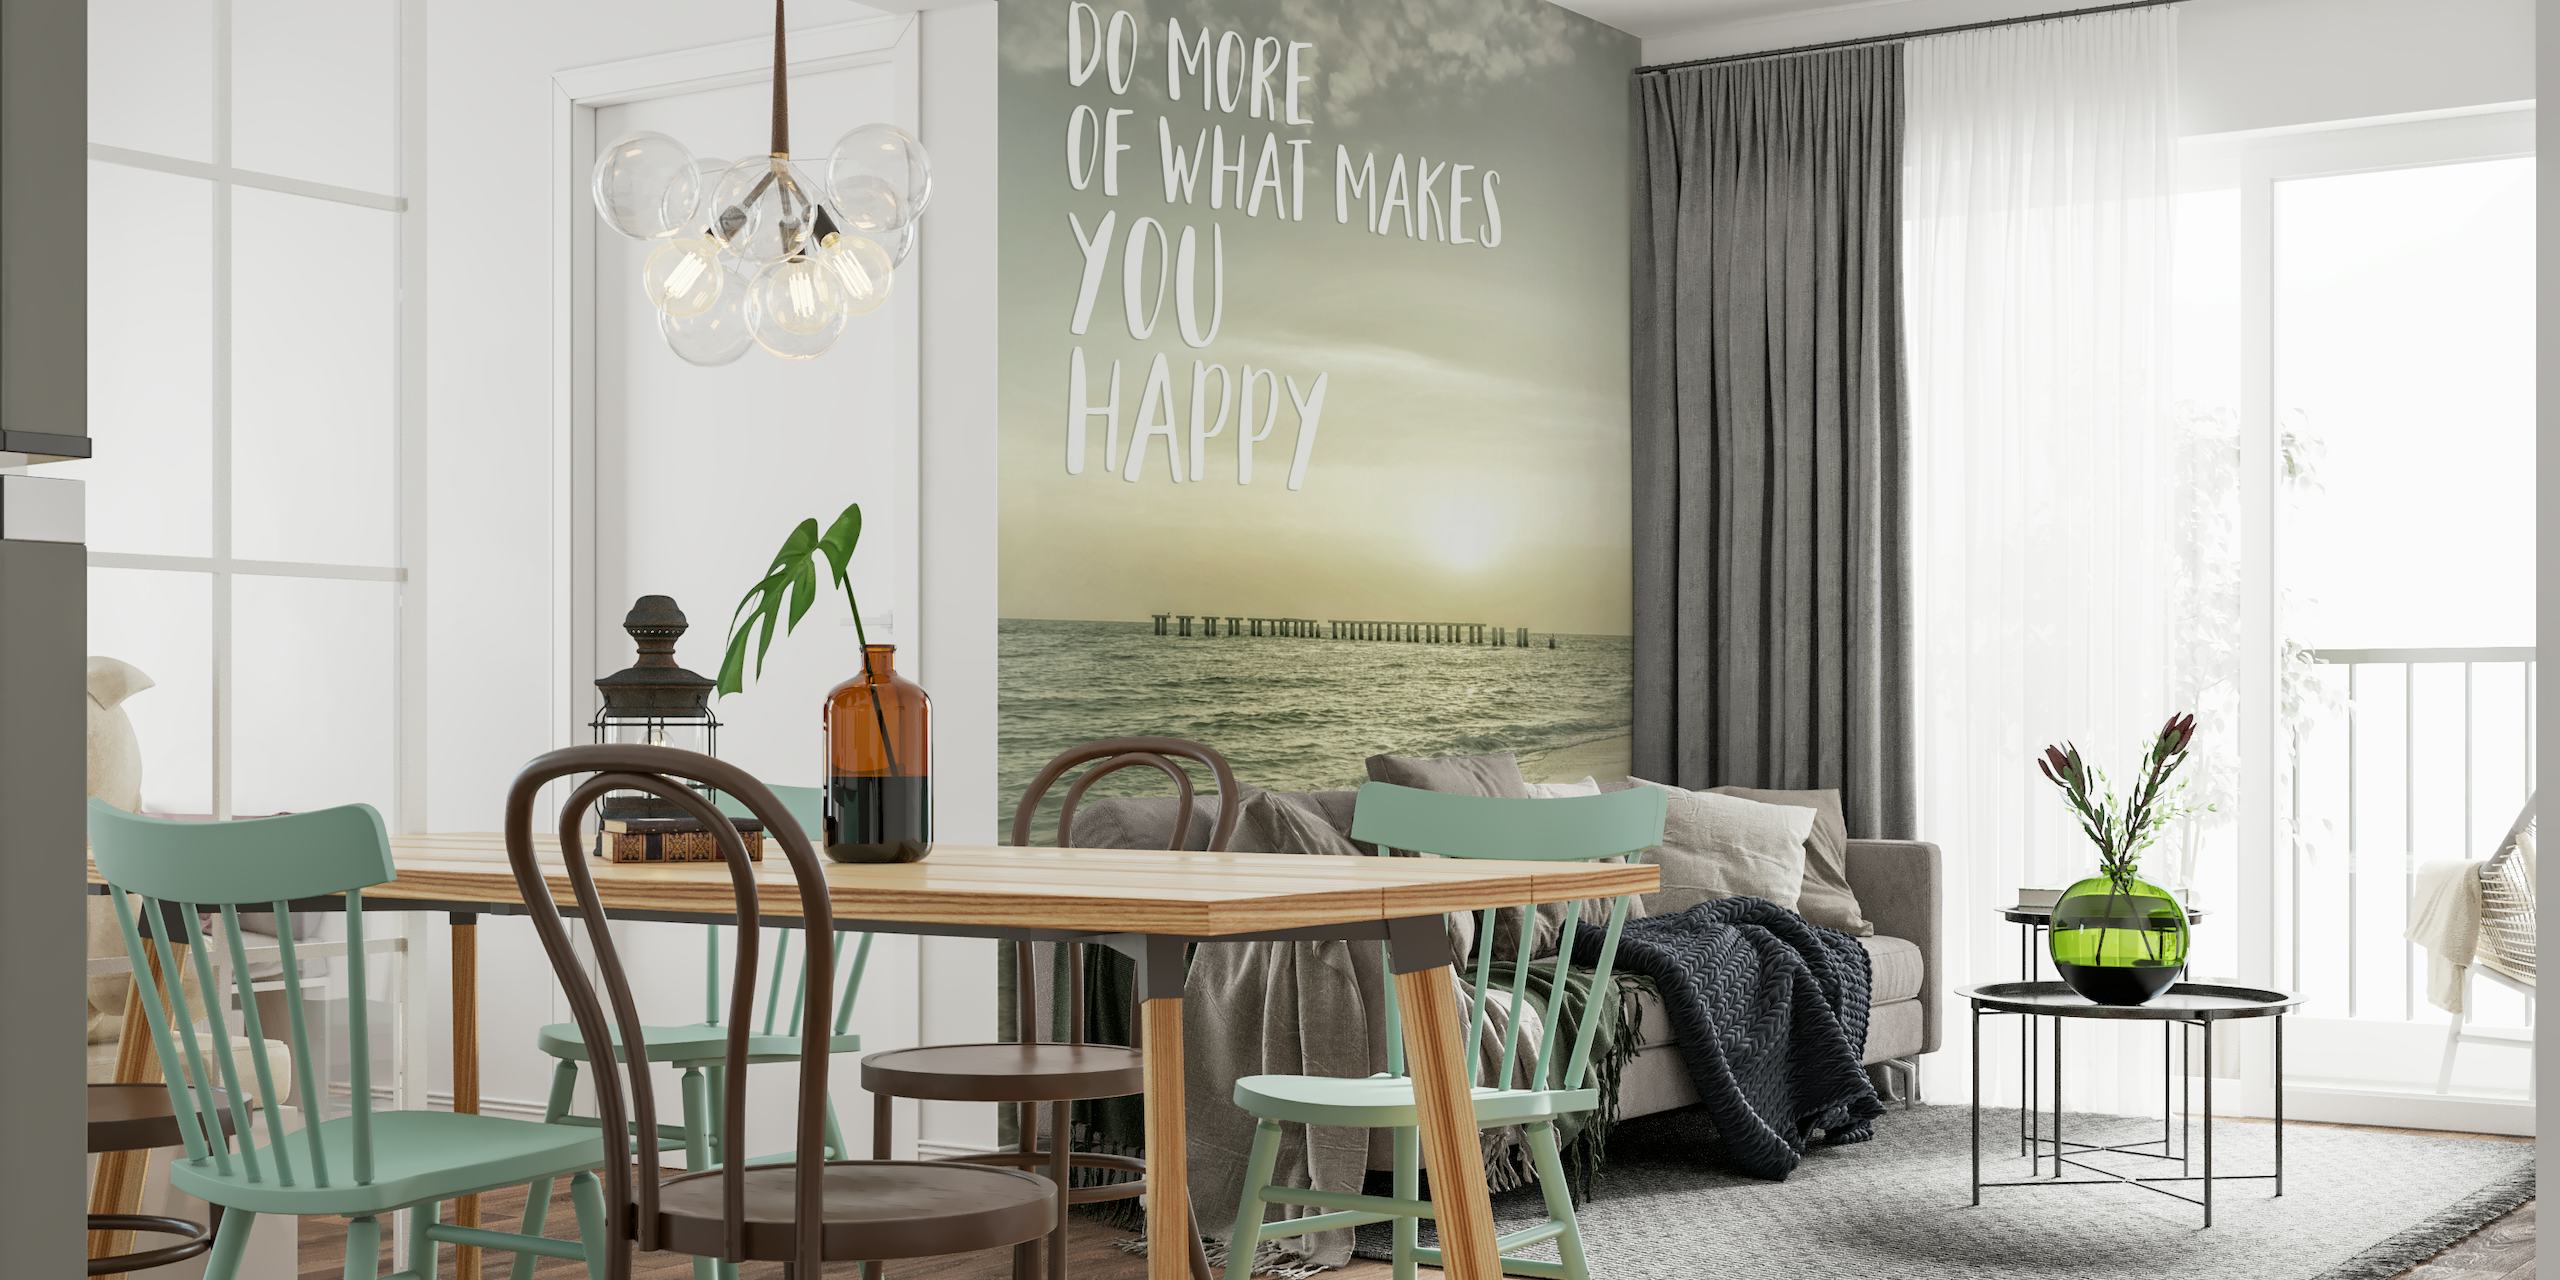 Do more of what makes you happy | Sunset papel pintado